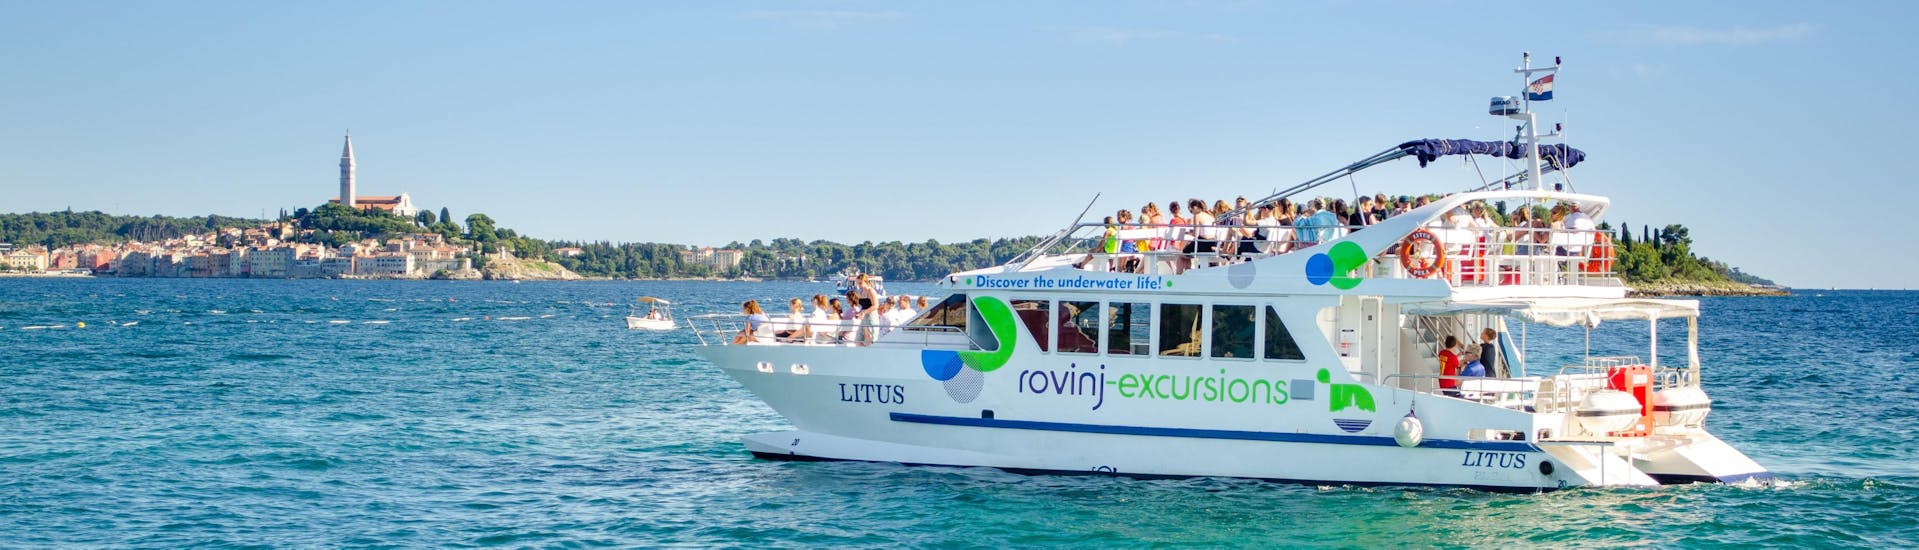 View of Litus, the great catamaran that will take you on a trip with Rovinj Excursions.